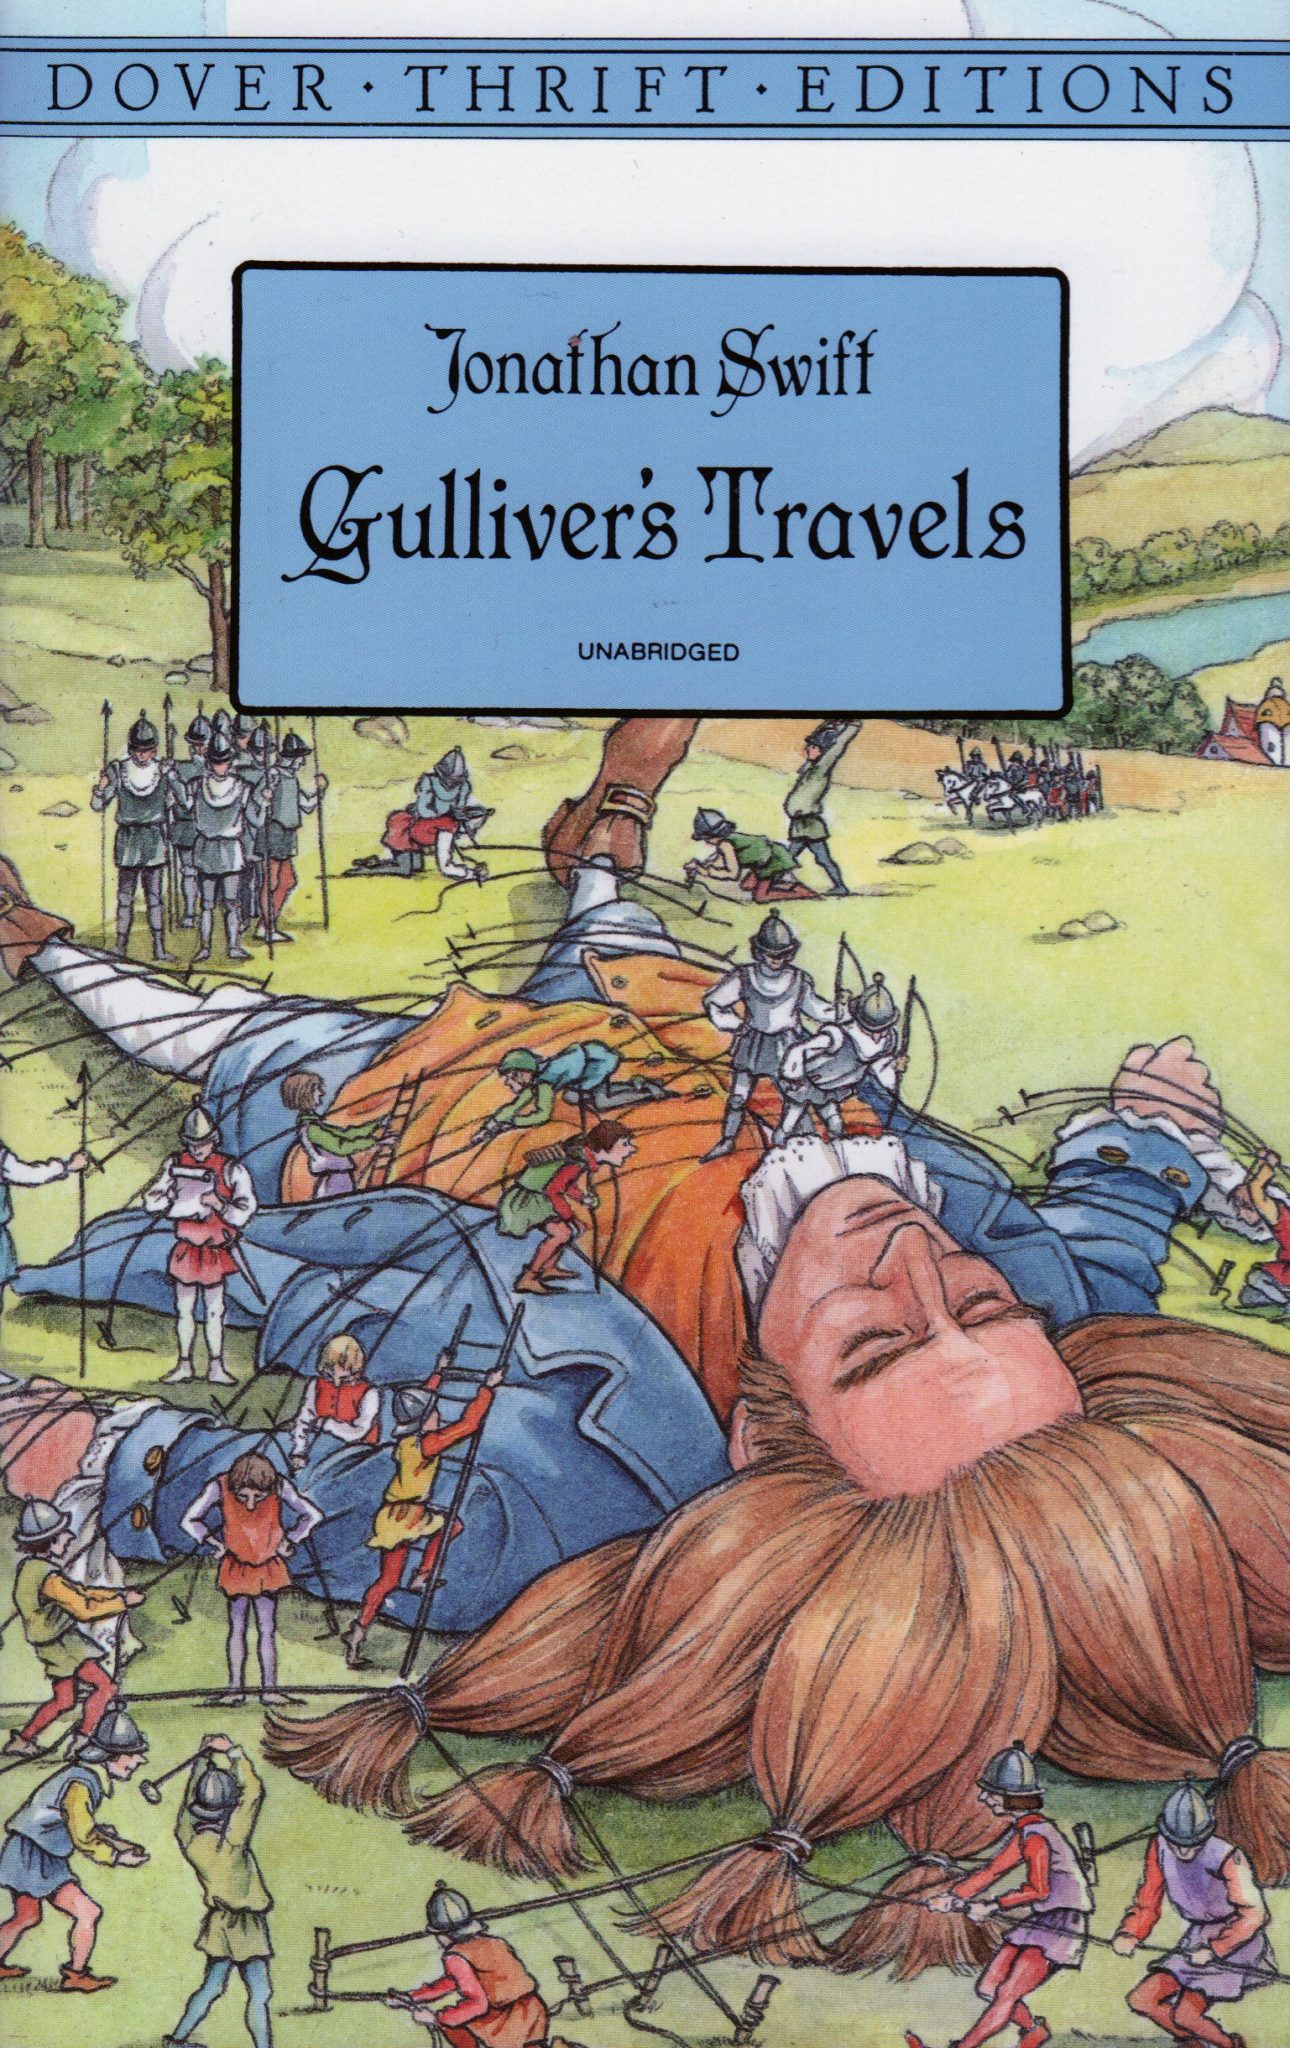 gulliver's travel discussion questions